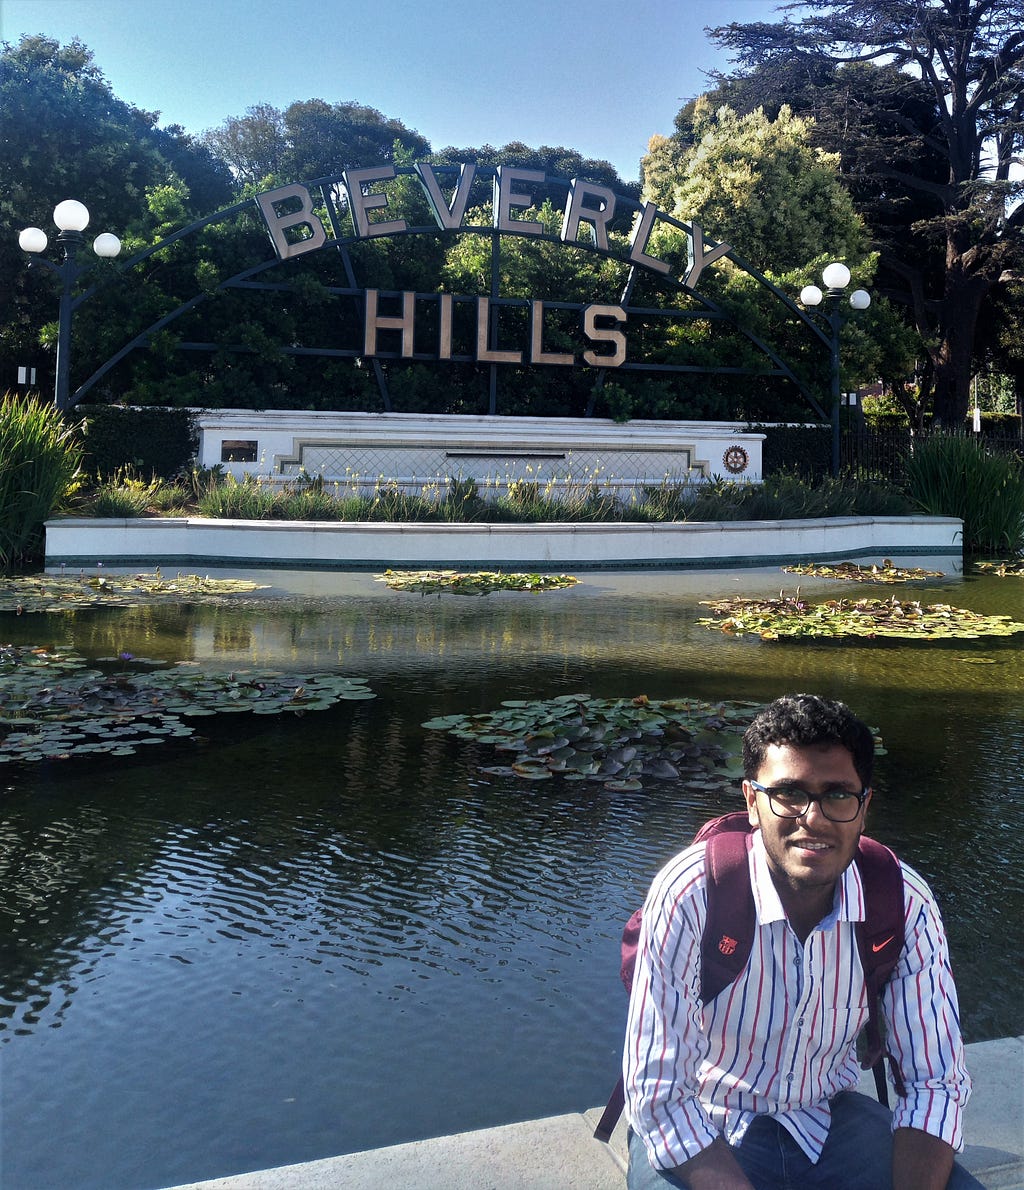 The Beverly Hills sign in front of the Garden